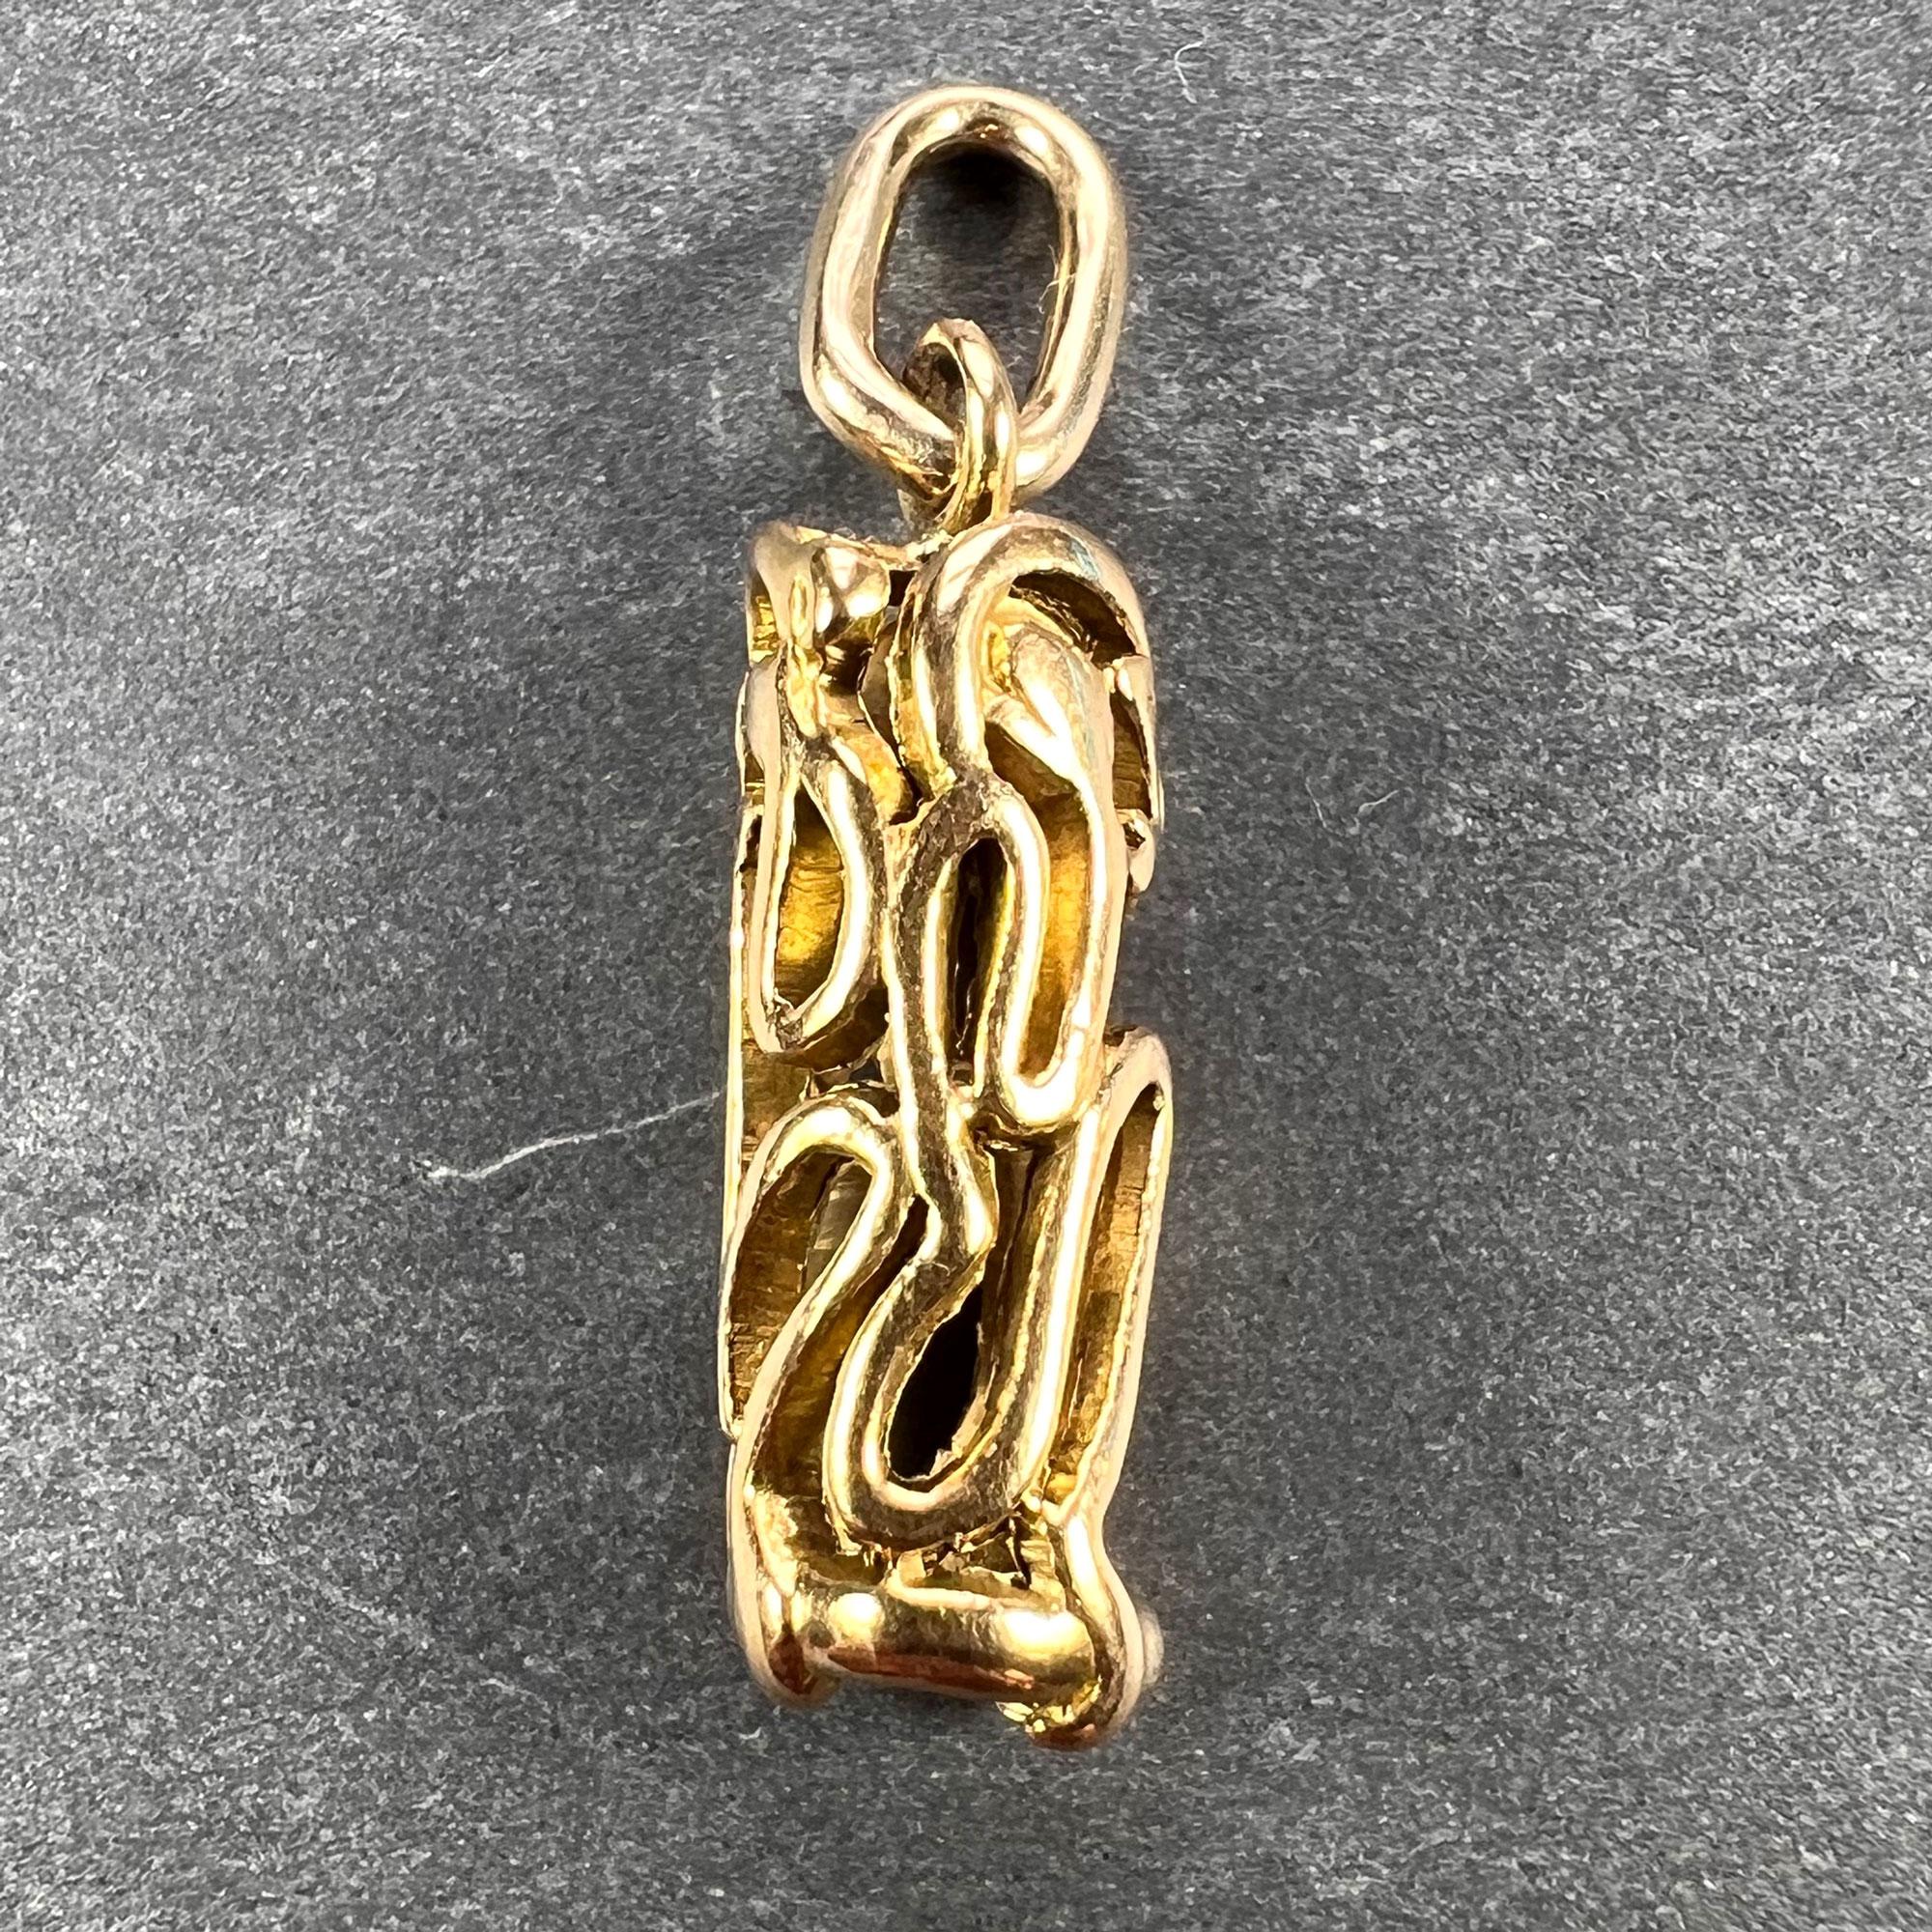 An 18 karat (18K) yellow gold charm pendant designed as a pierced cylinder depicting the three wise monkeys in the traditional poses for ‘see no evil’ ‘hear no evil’ and ‘speak no evil’. Unmarked but tested as 18 karat gold.

Dimensions: 1.8 x 0.5 x